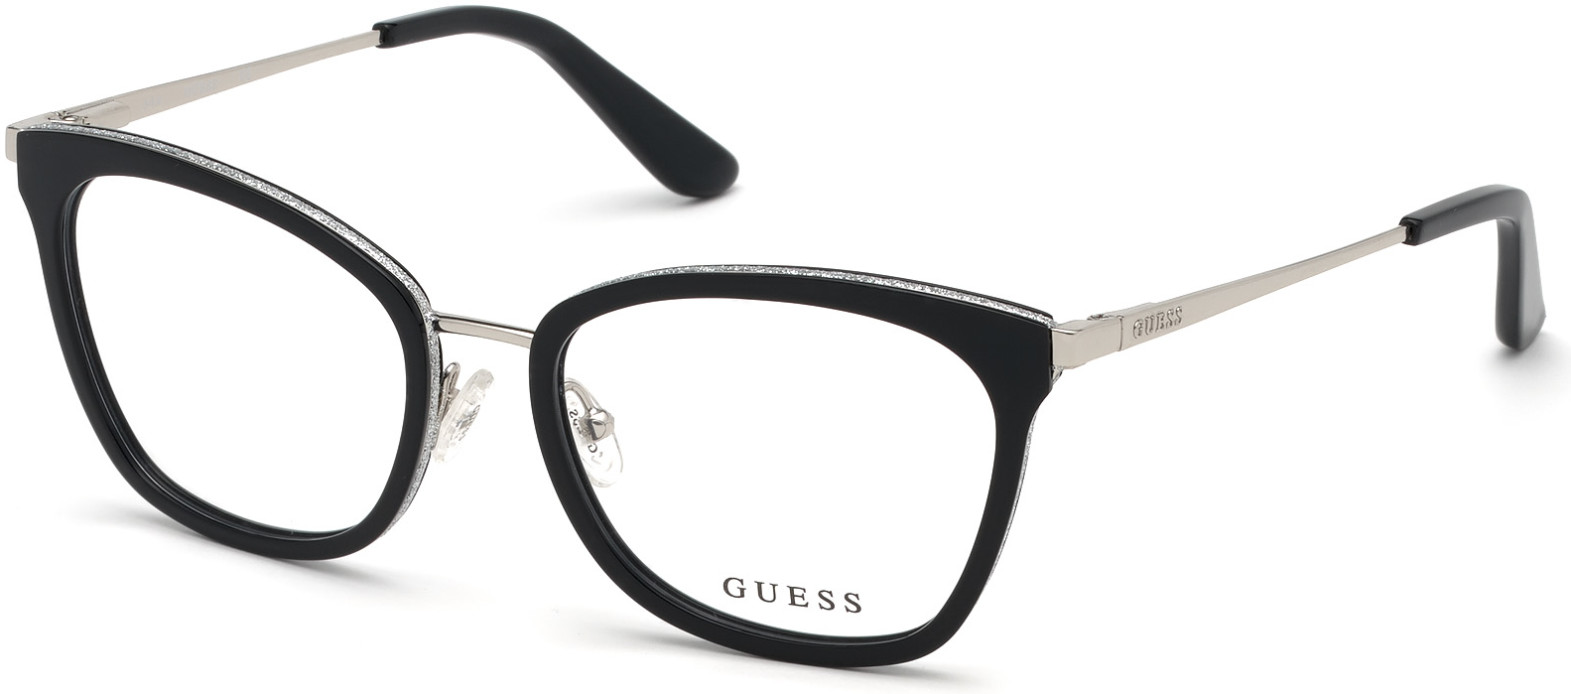 GUESS 2706